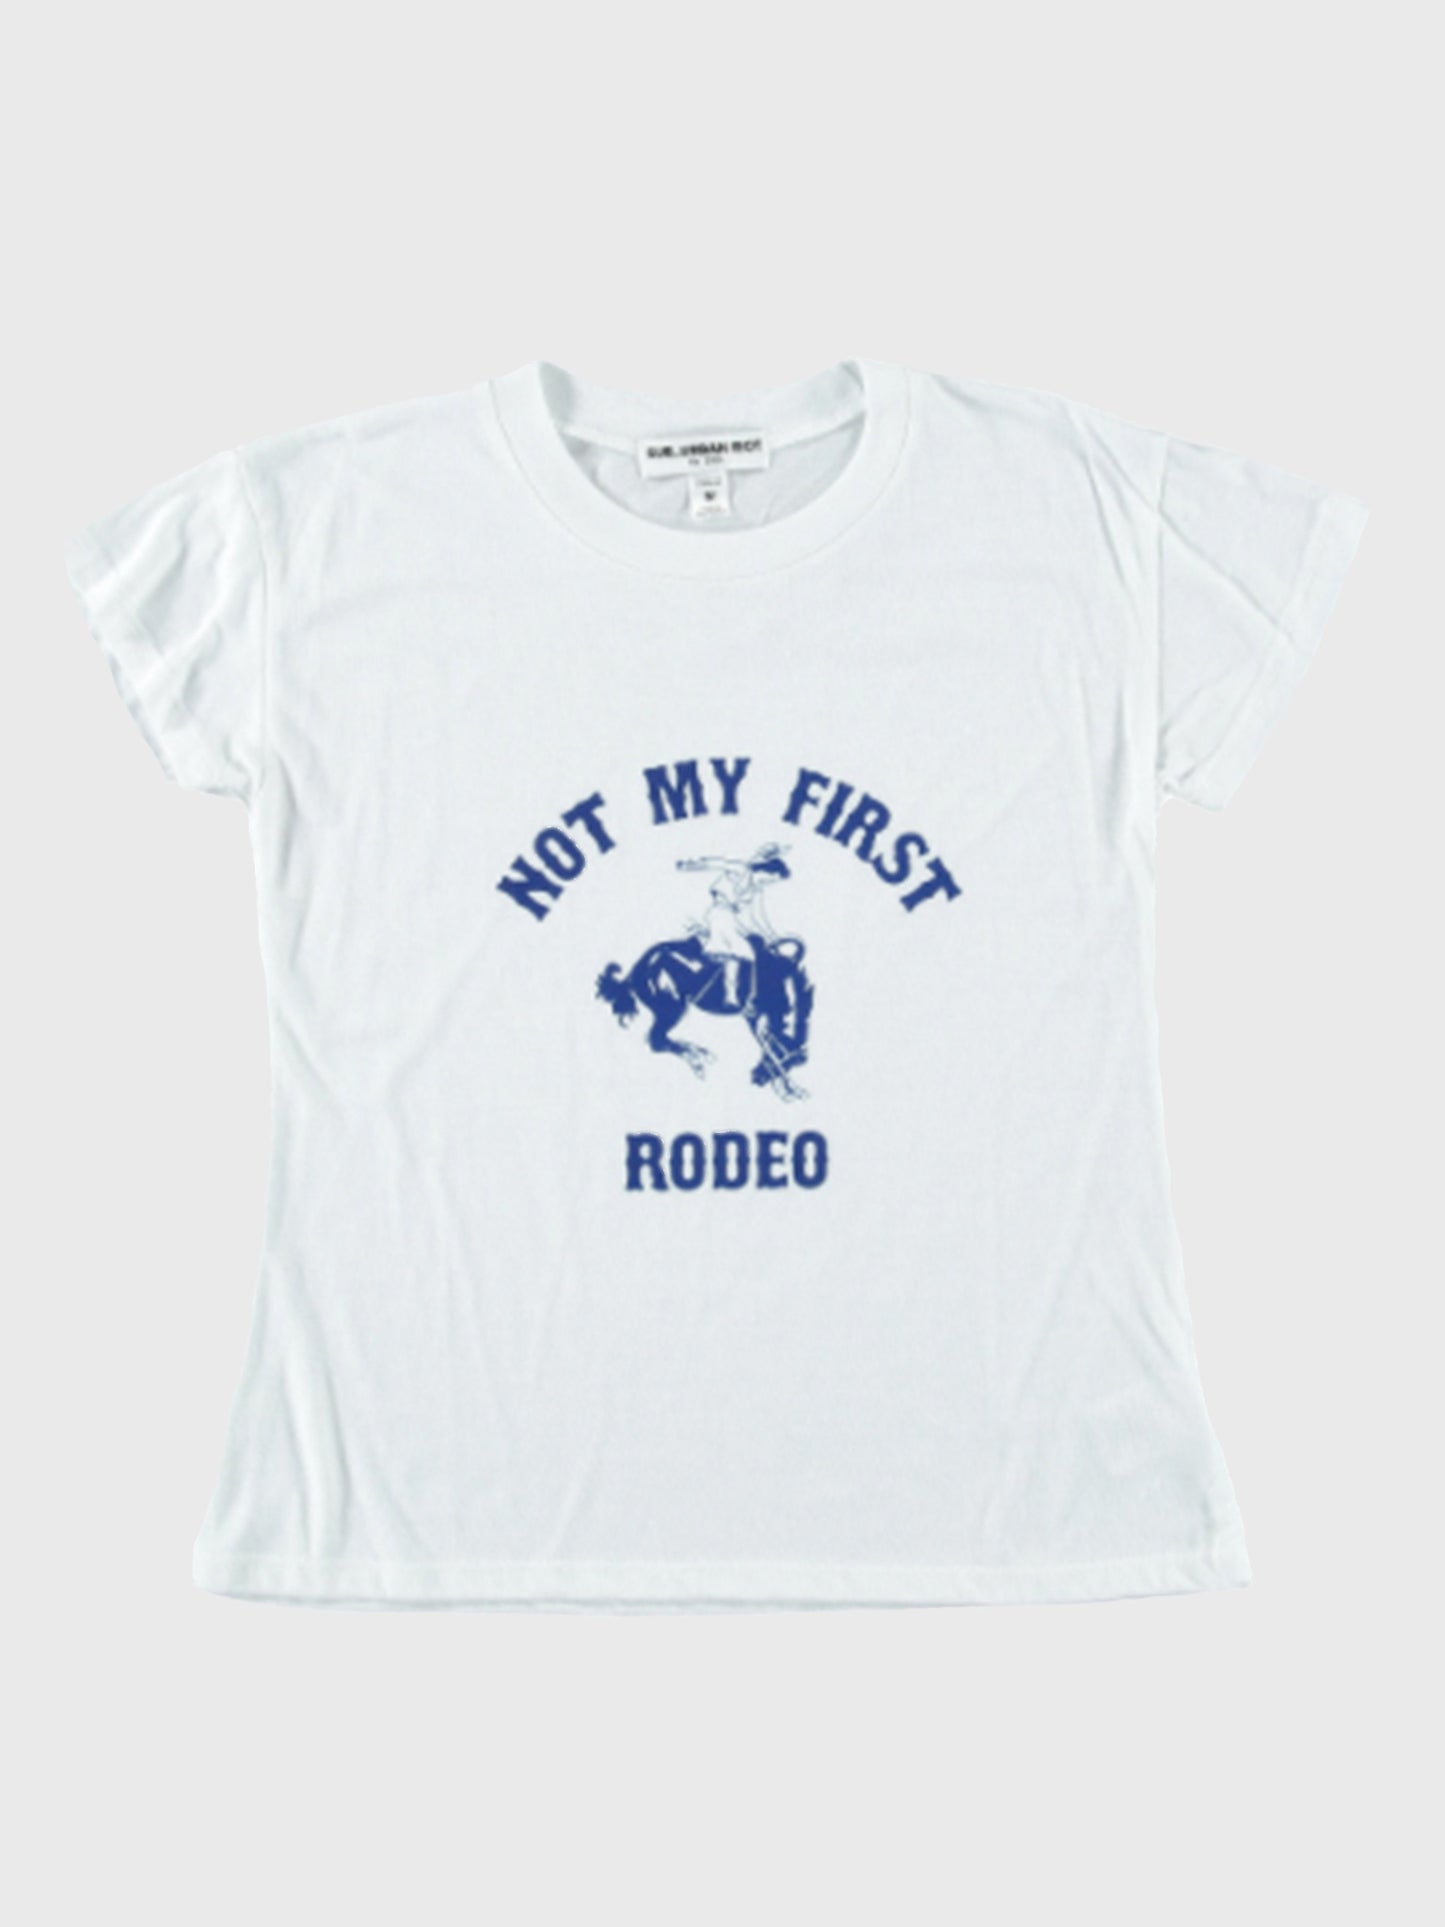 Sub_Urban Riot Girls' Not My First Rodeo Tee